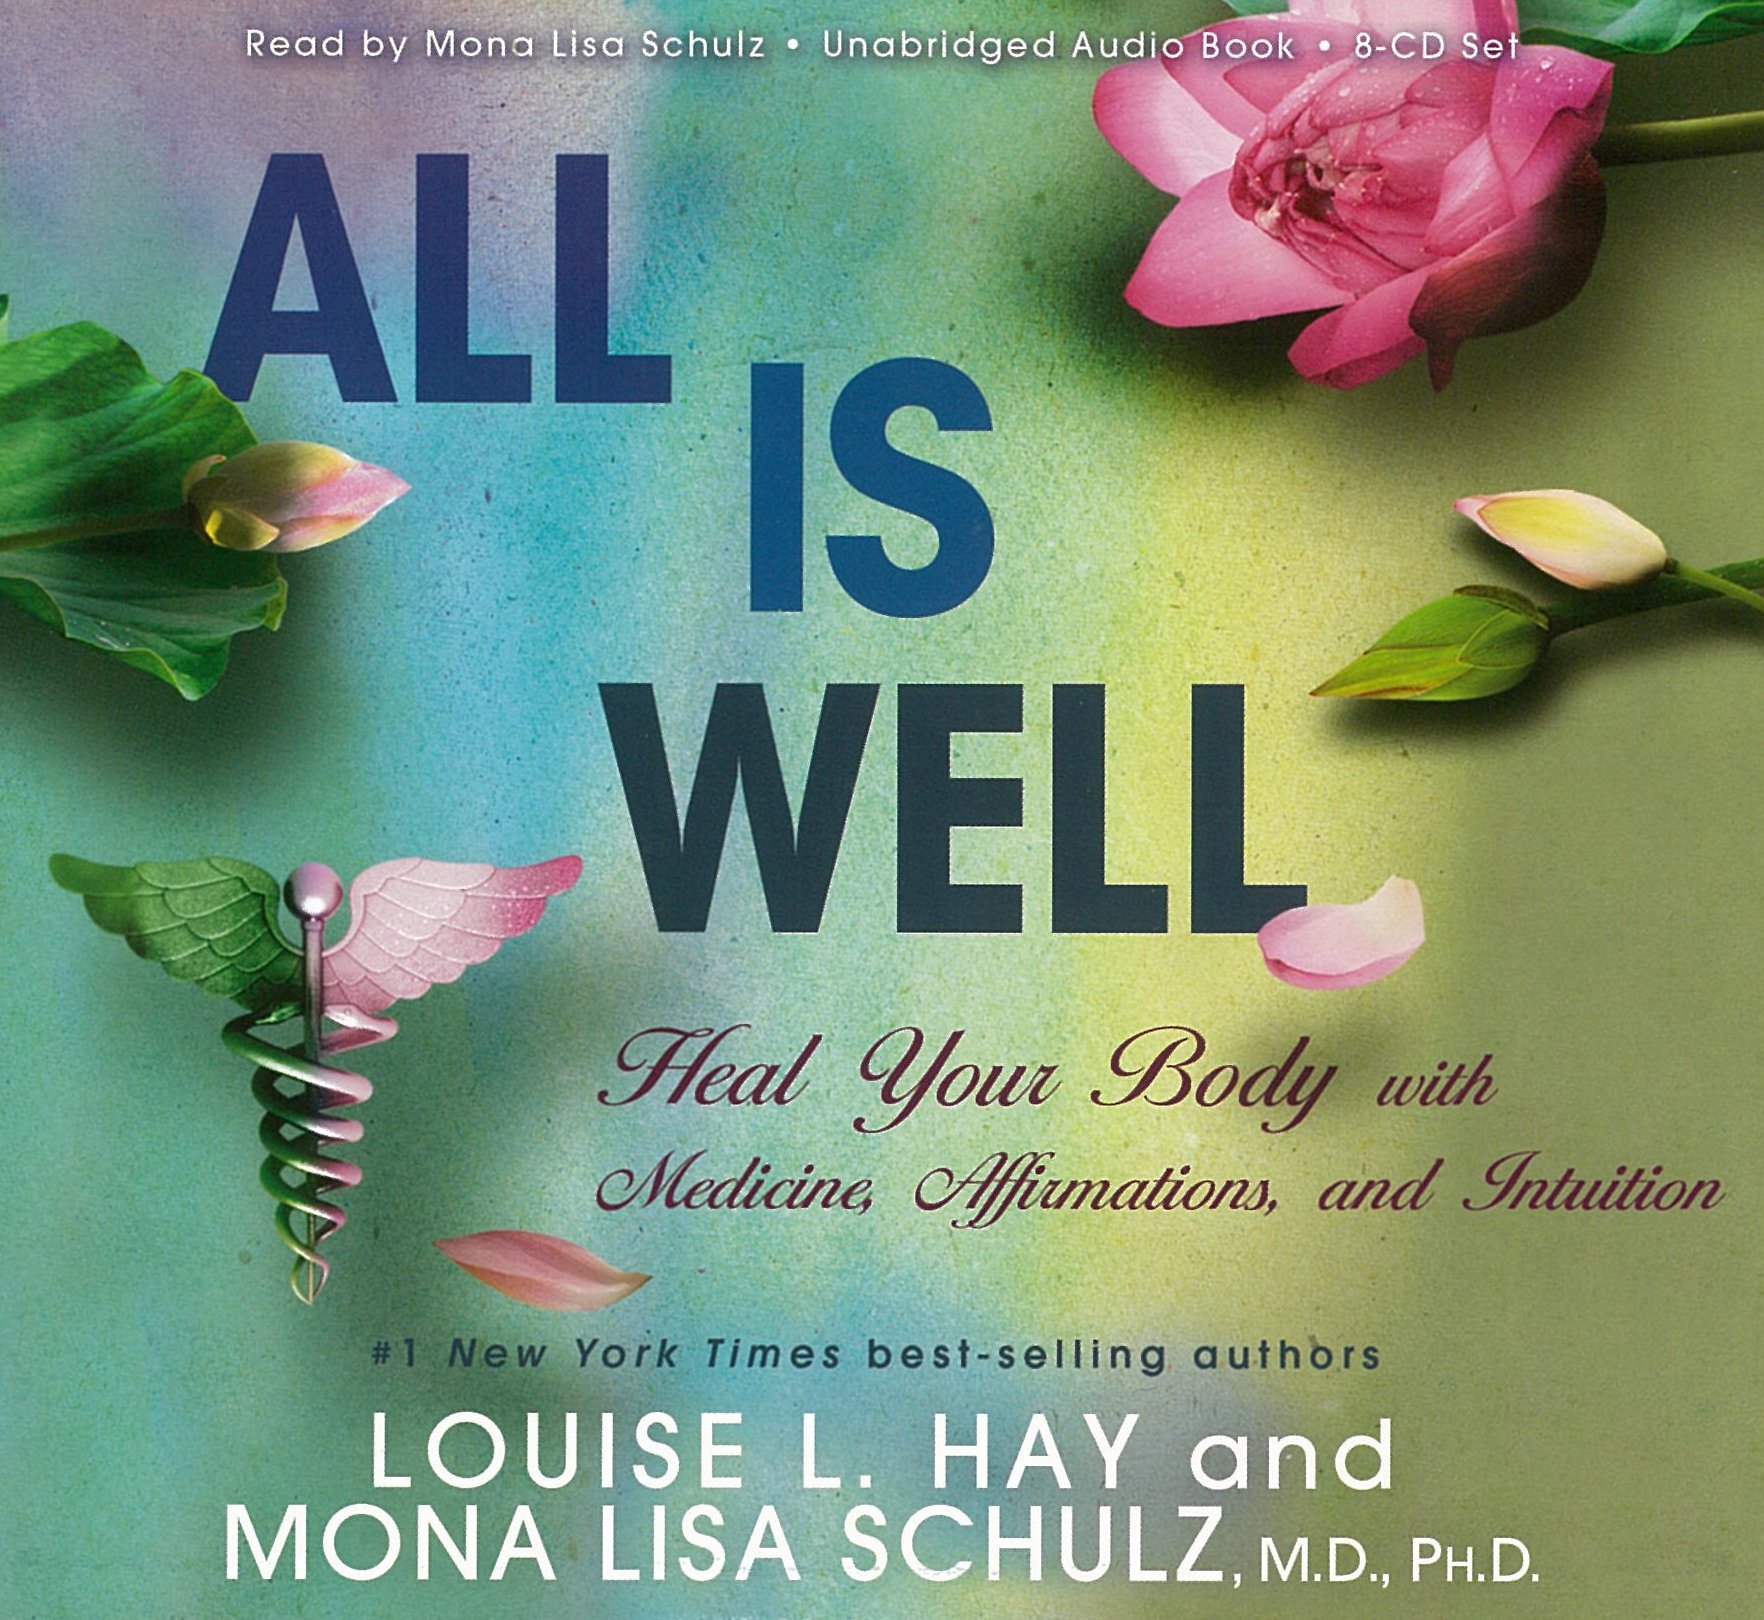 All is Well: Heal Your Body with Medicine, Affirmations, and Intuition - Mona Lisa Schulz, M.D., Ph.D.